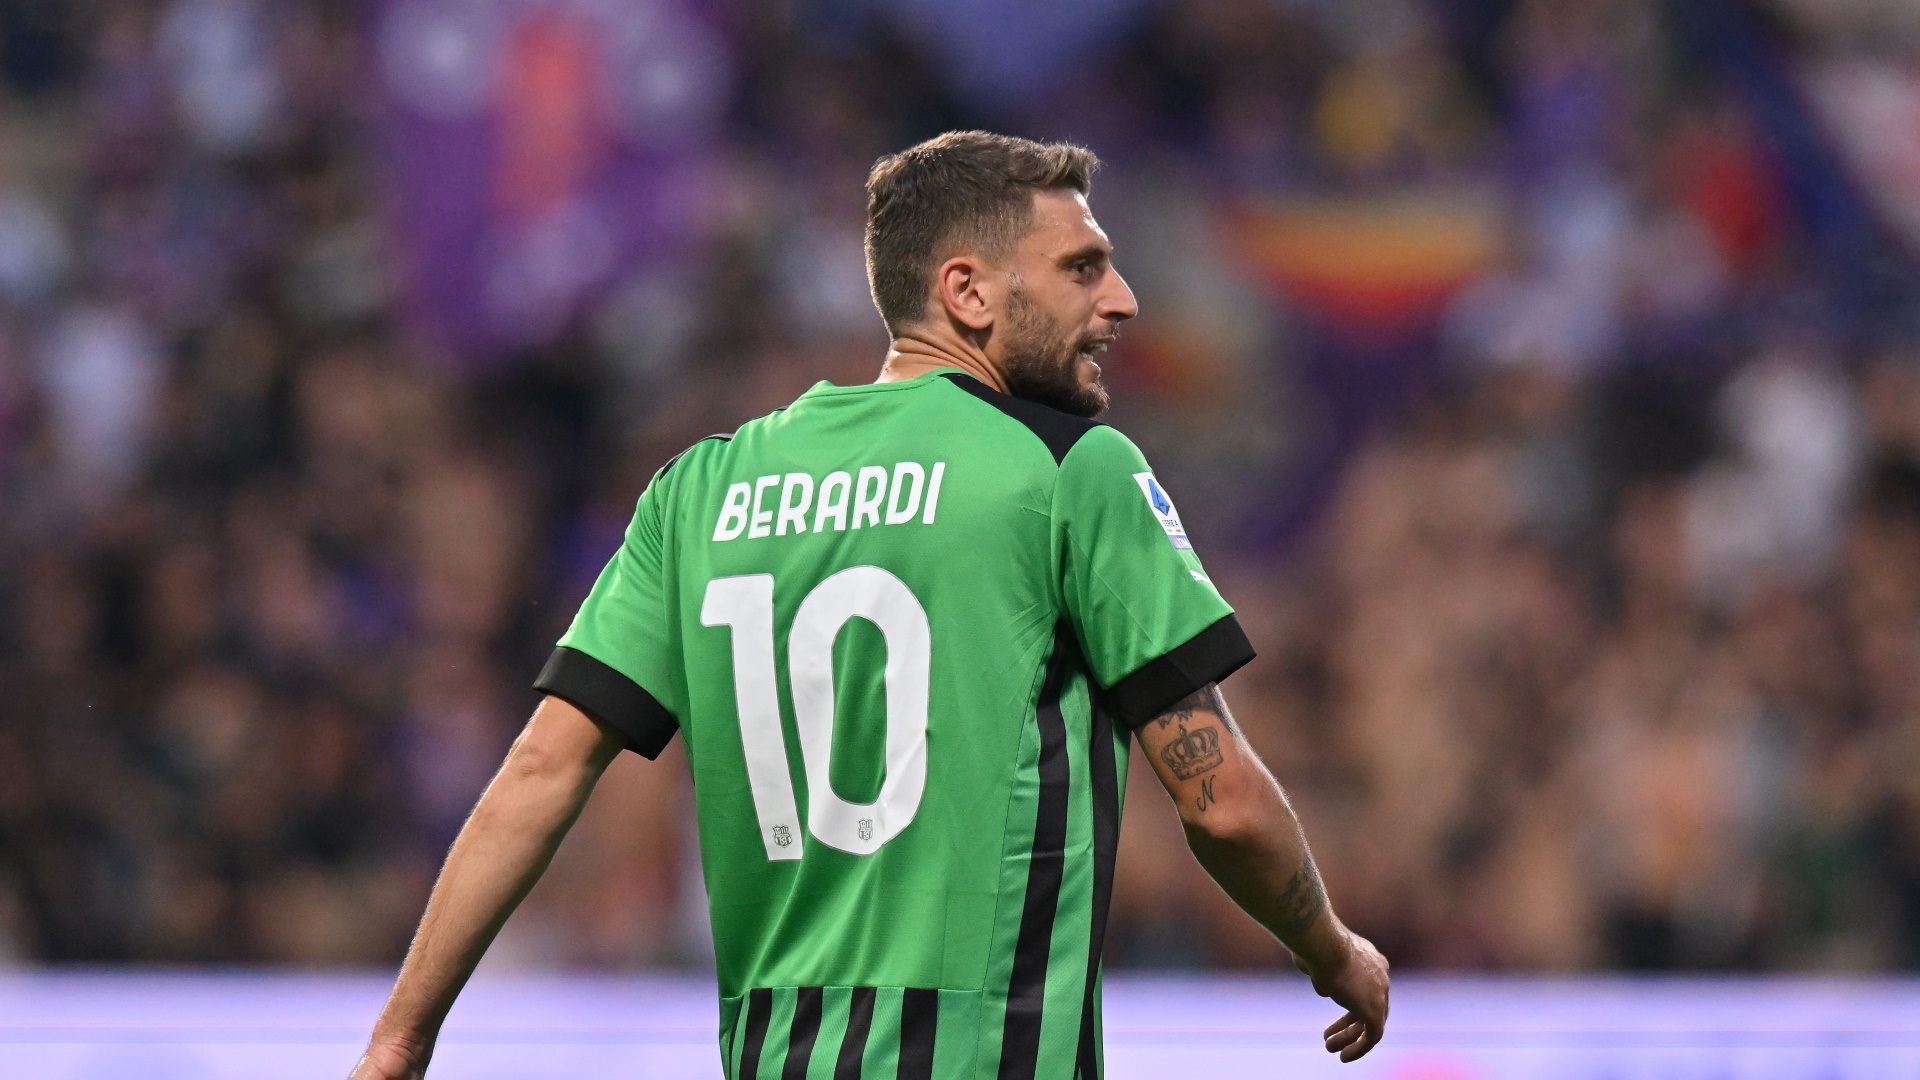 Domenico Berardi missed the opener as he has been practicing on the side to force a move to Juventus, but Sassuolo believe it's too late.